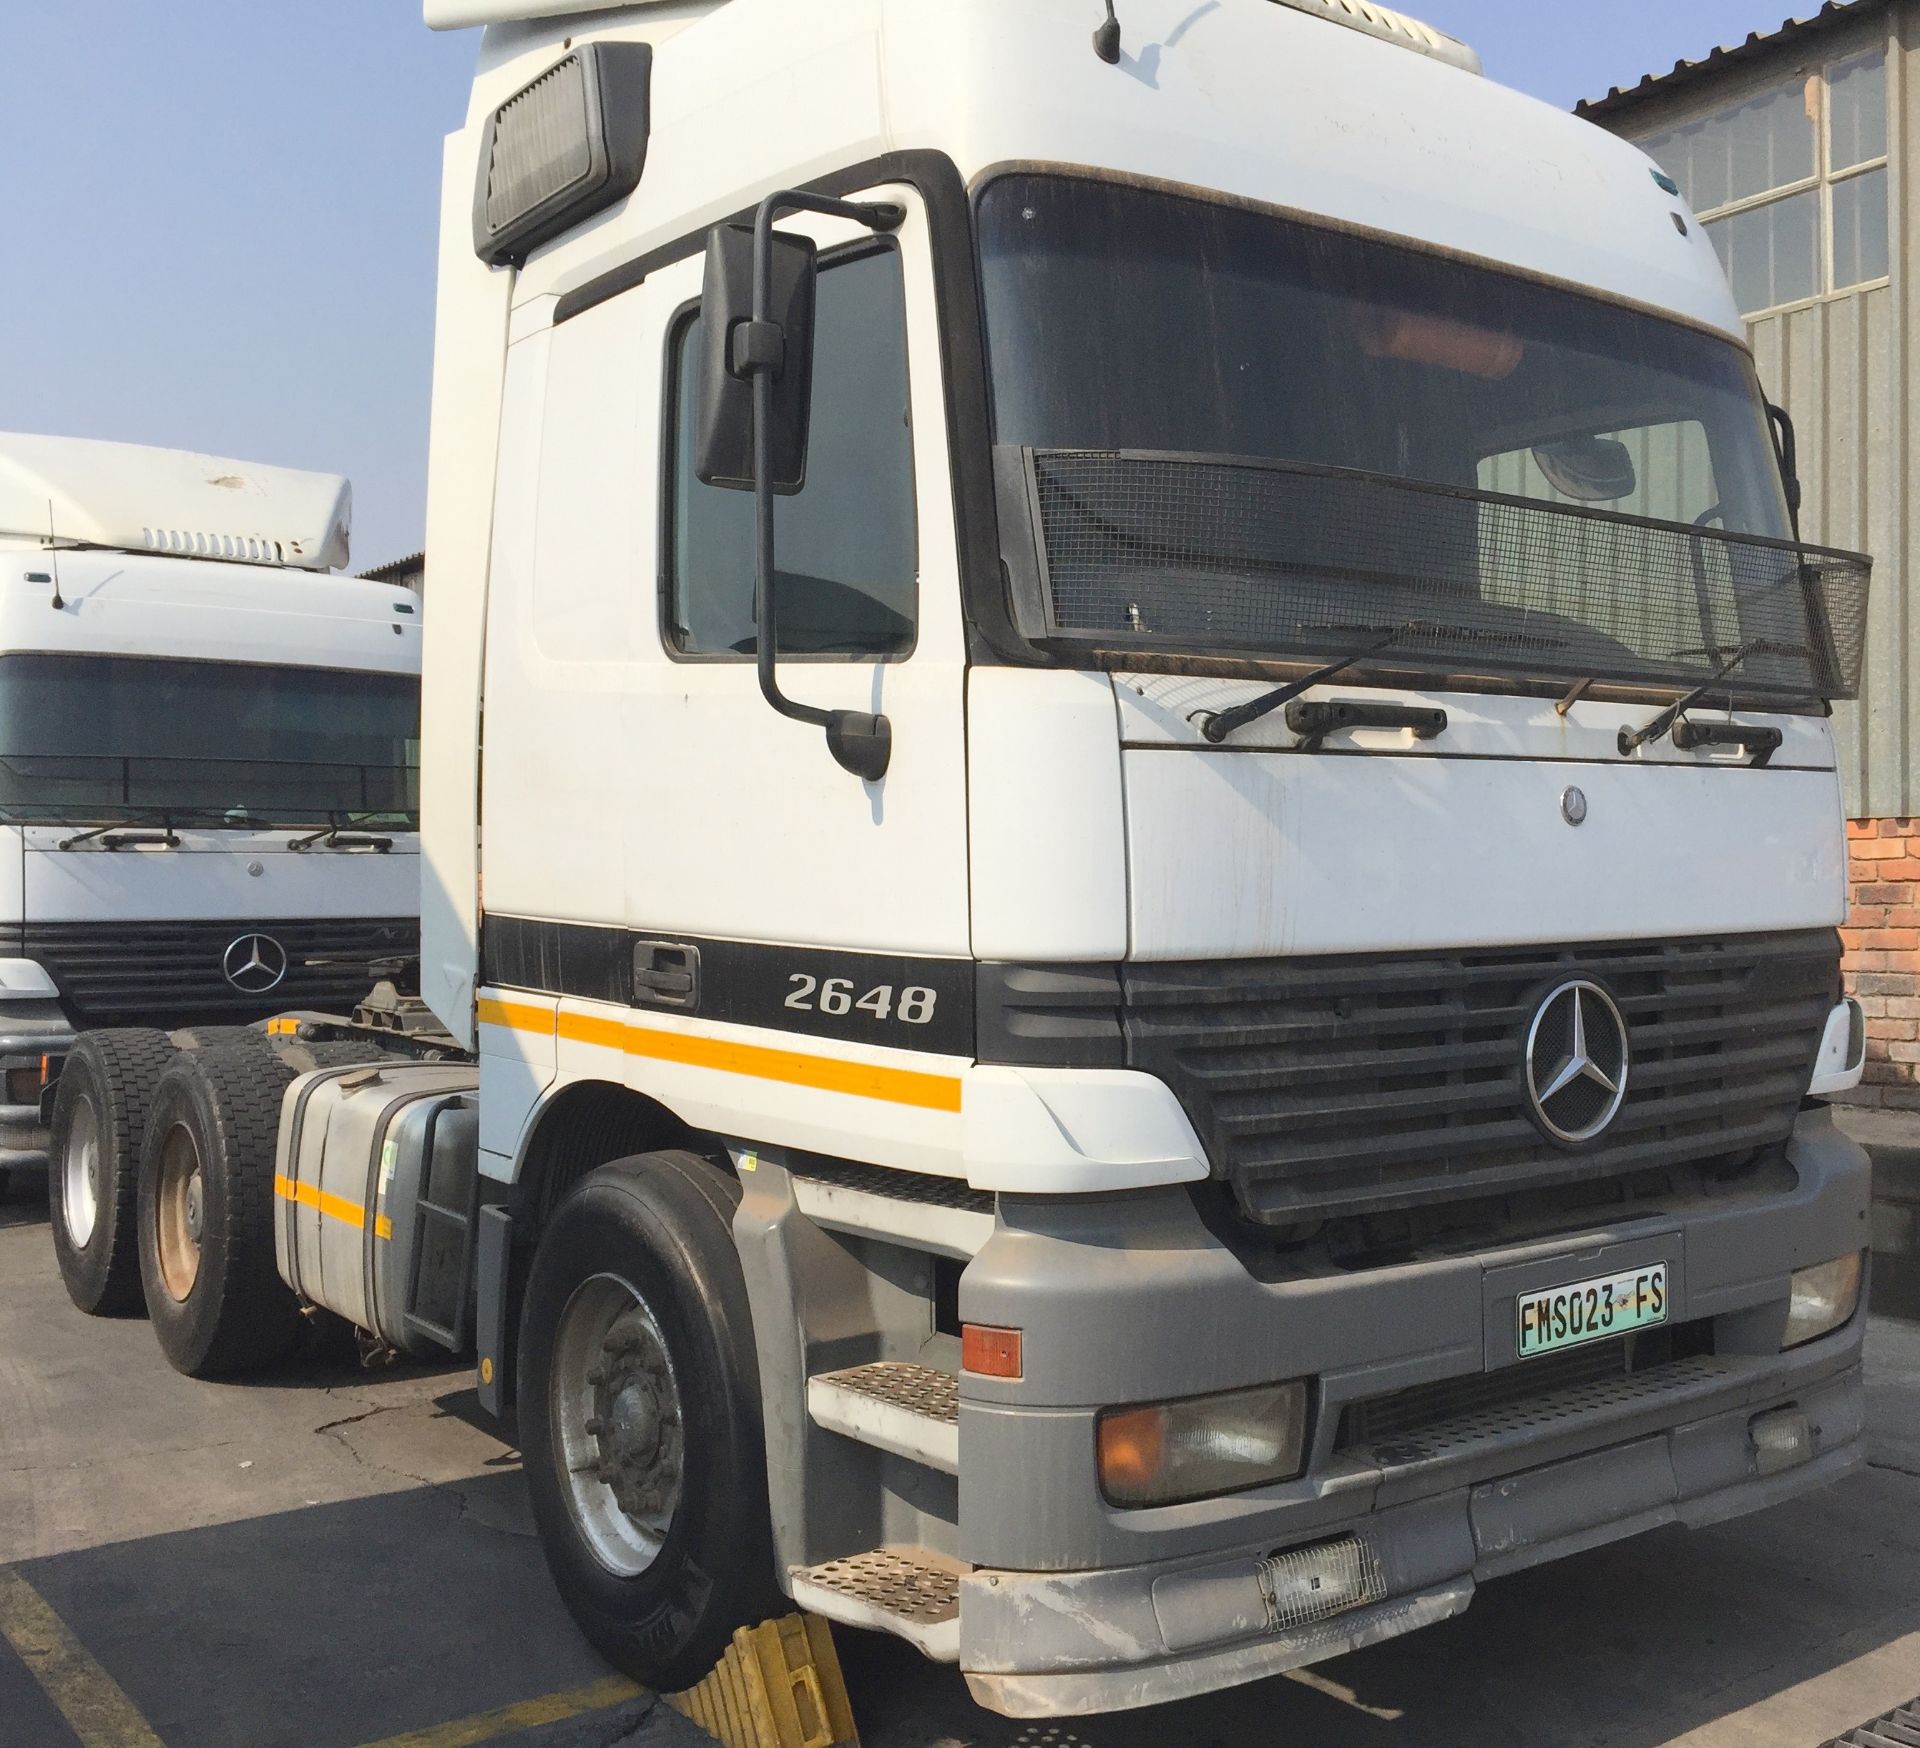 2003 M/BENZ ACTROS 2648 6X4 T/T - REG NO: FMS023FS - (ITEM TO BE SOLD SUBJECT TO CONFIRMATION)